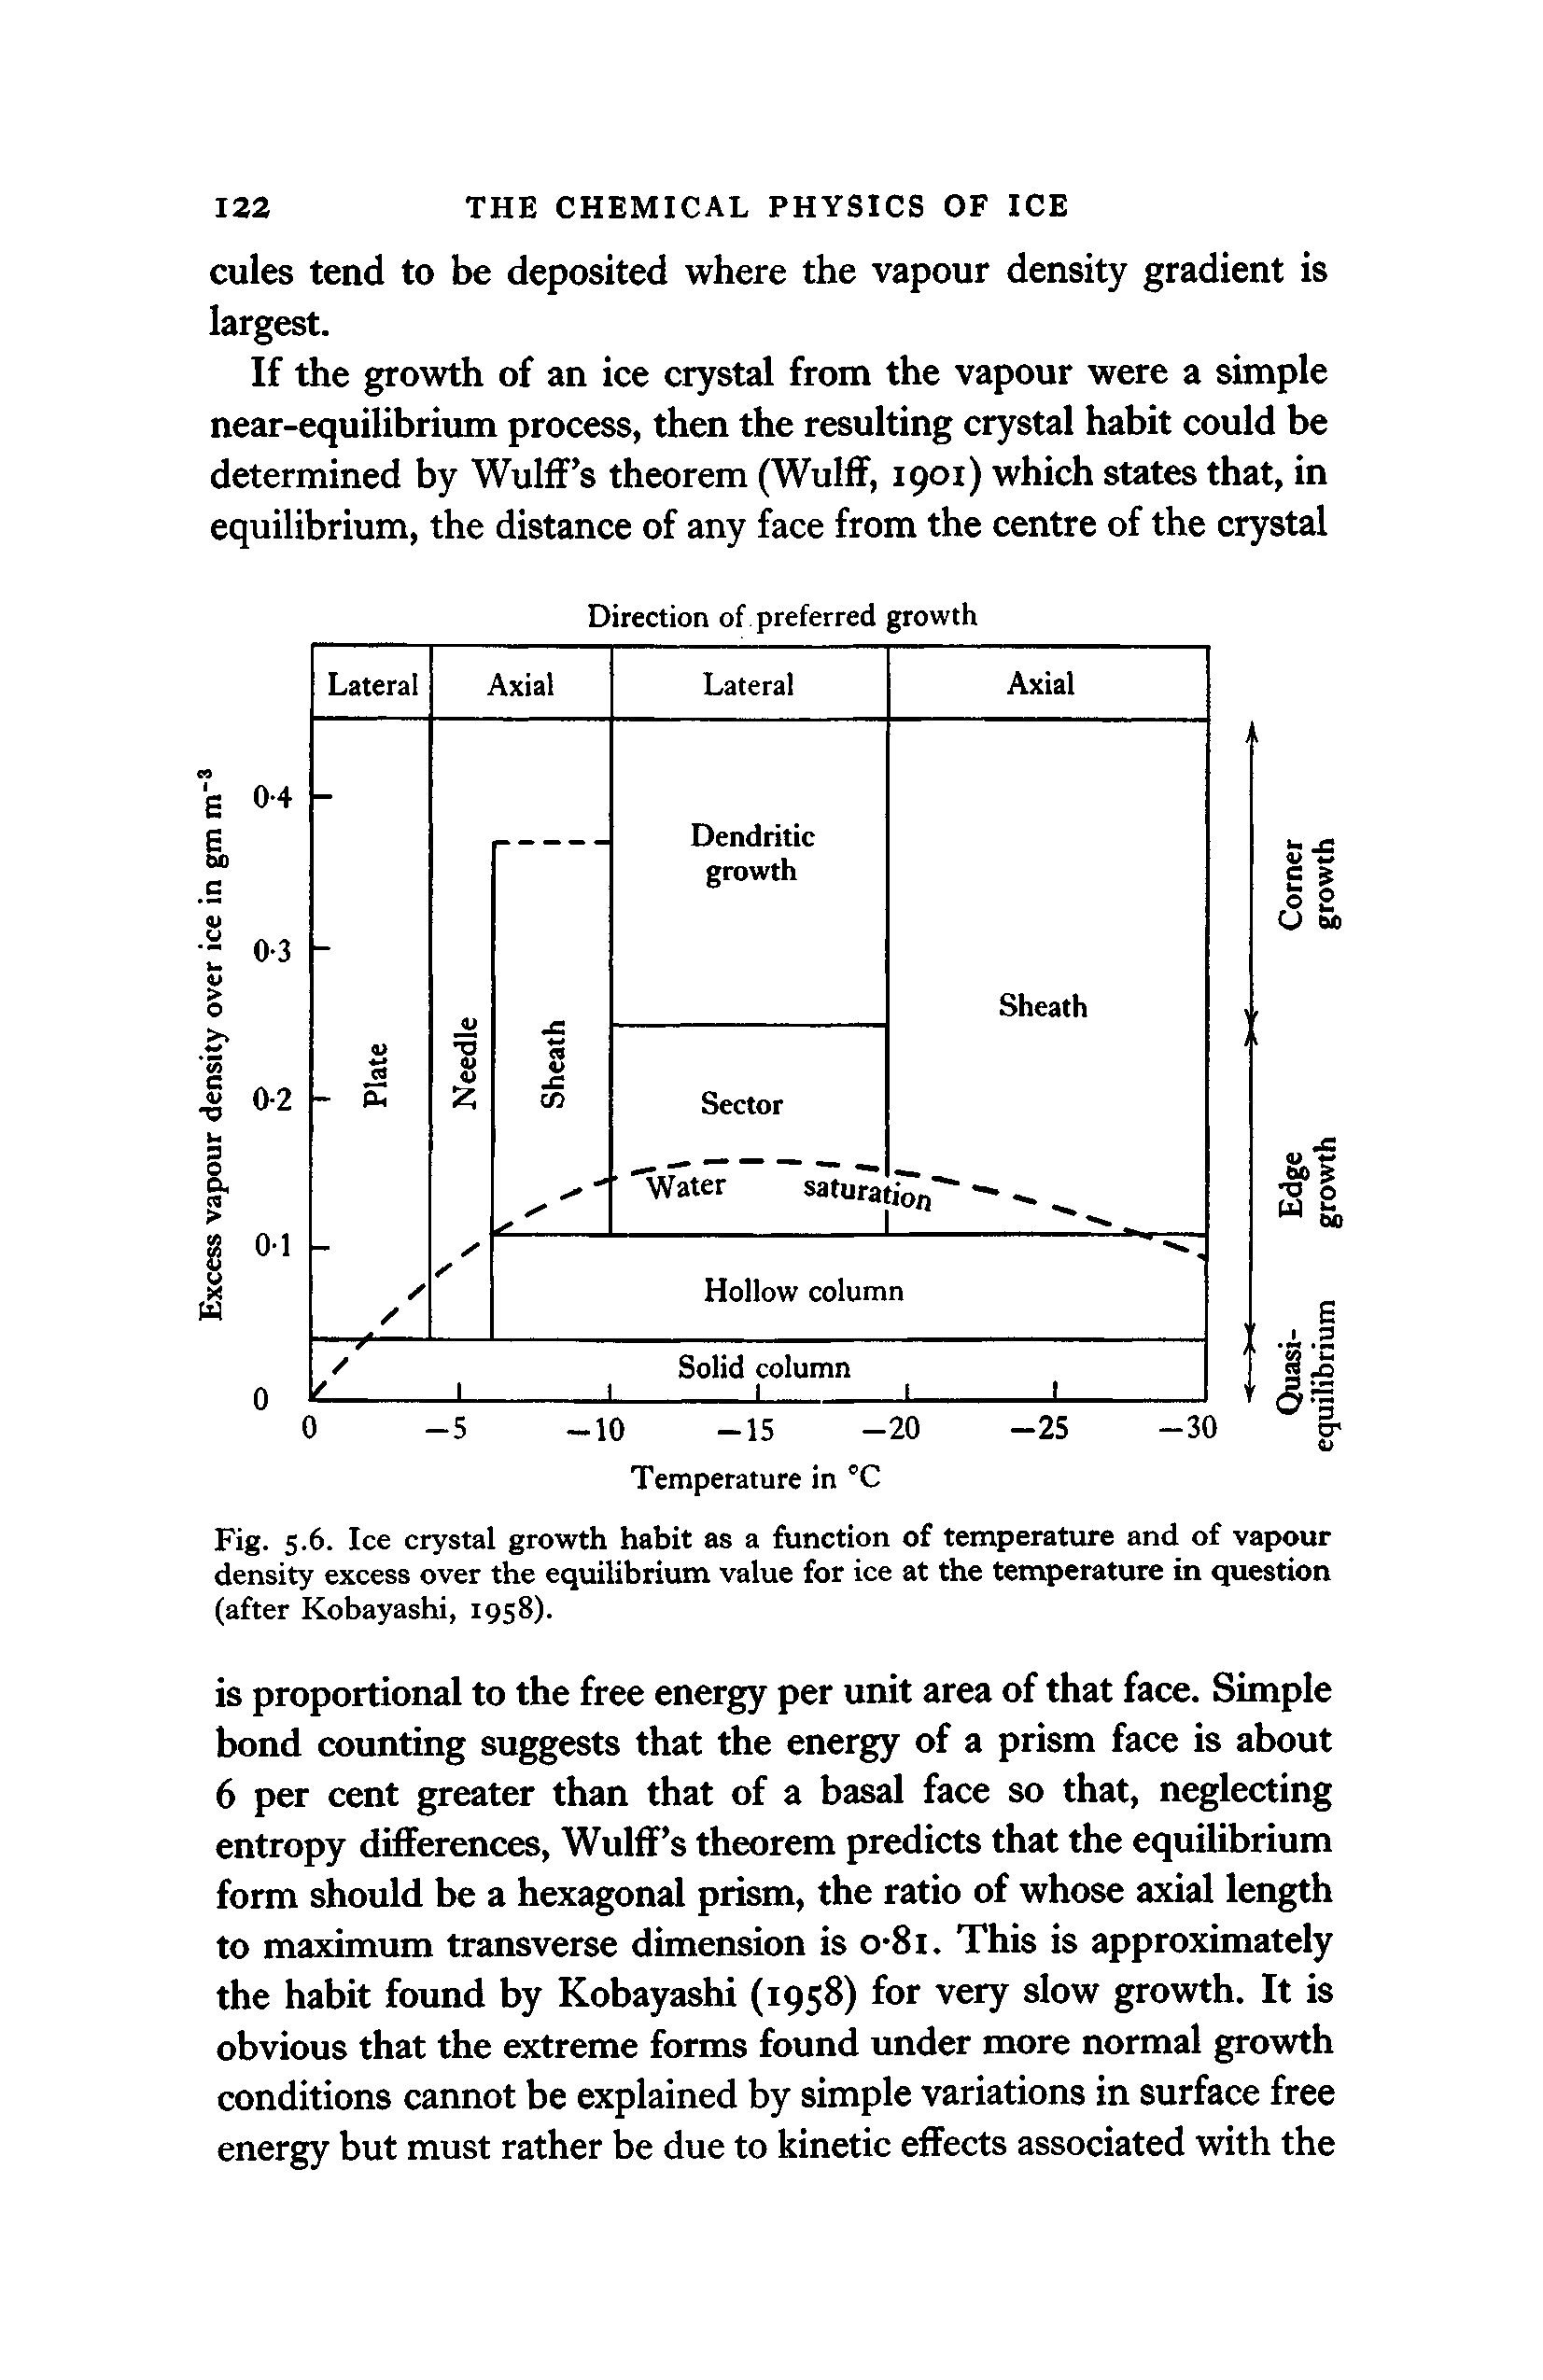 Fig. 5.6. Ice crystal growth habit as a function of temperature and of vapour density excess over the equilibrium value for ice at the temperature in question (after Kobayashi, 1958).